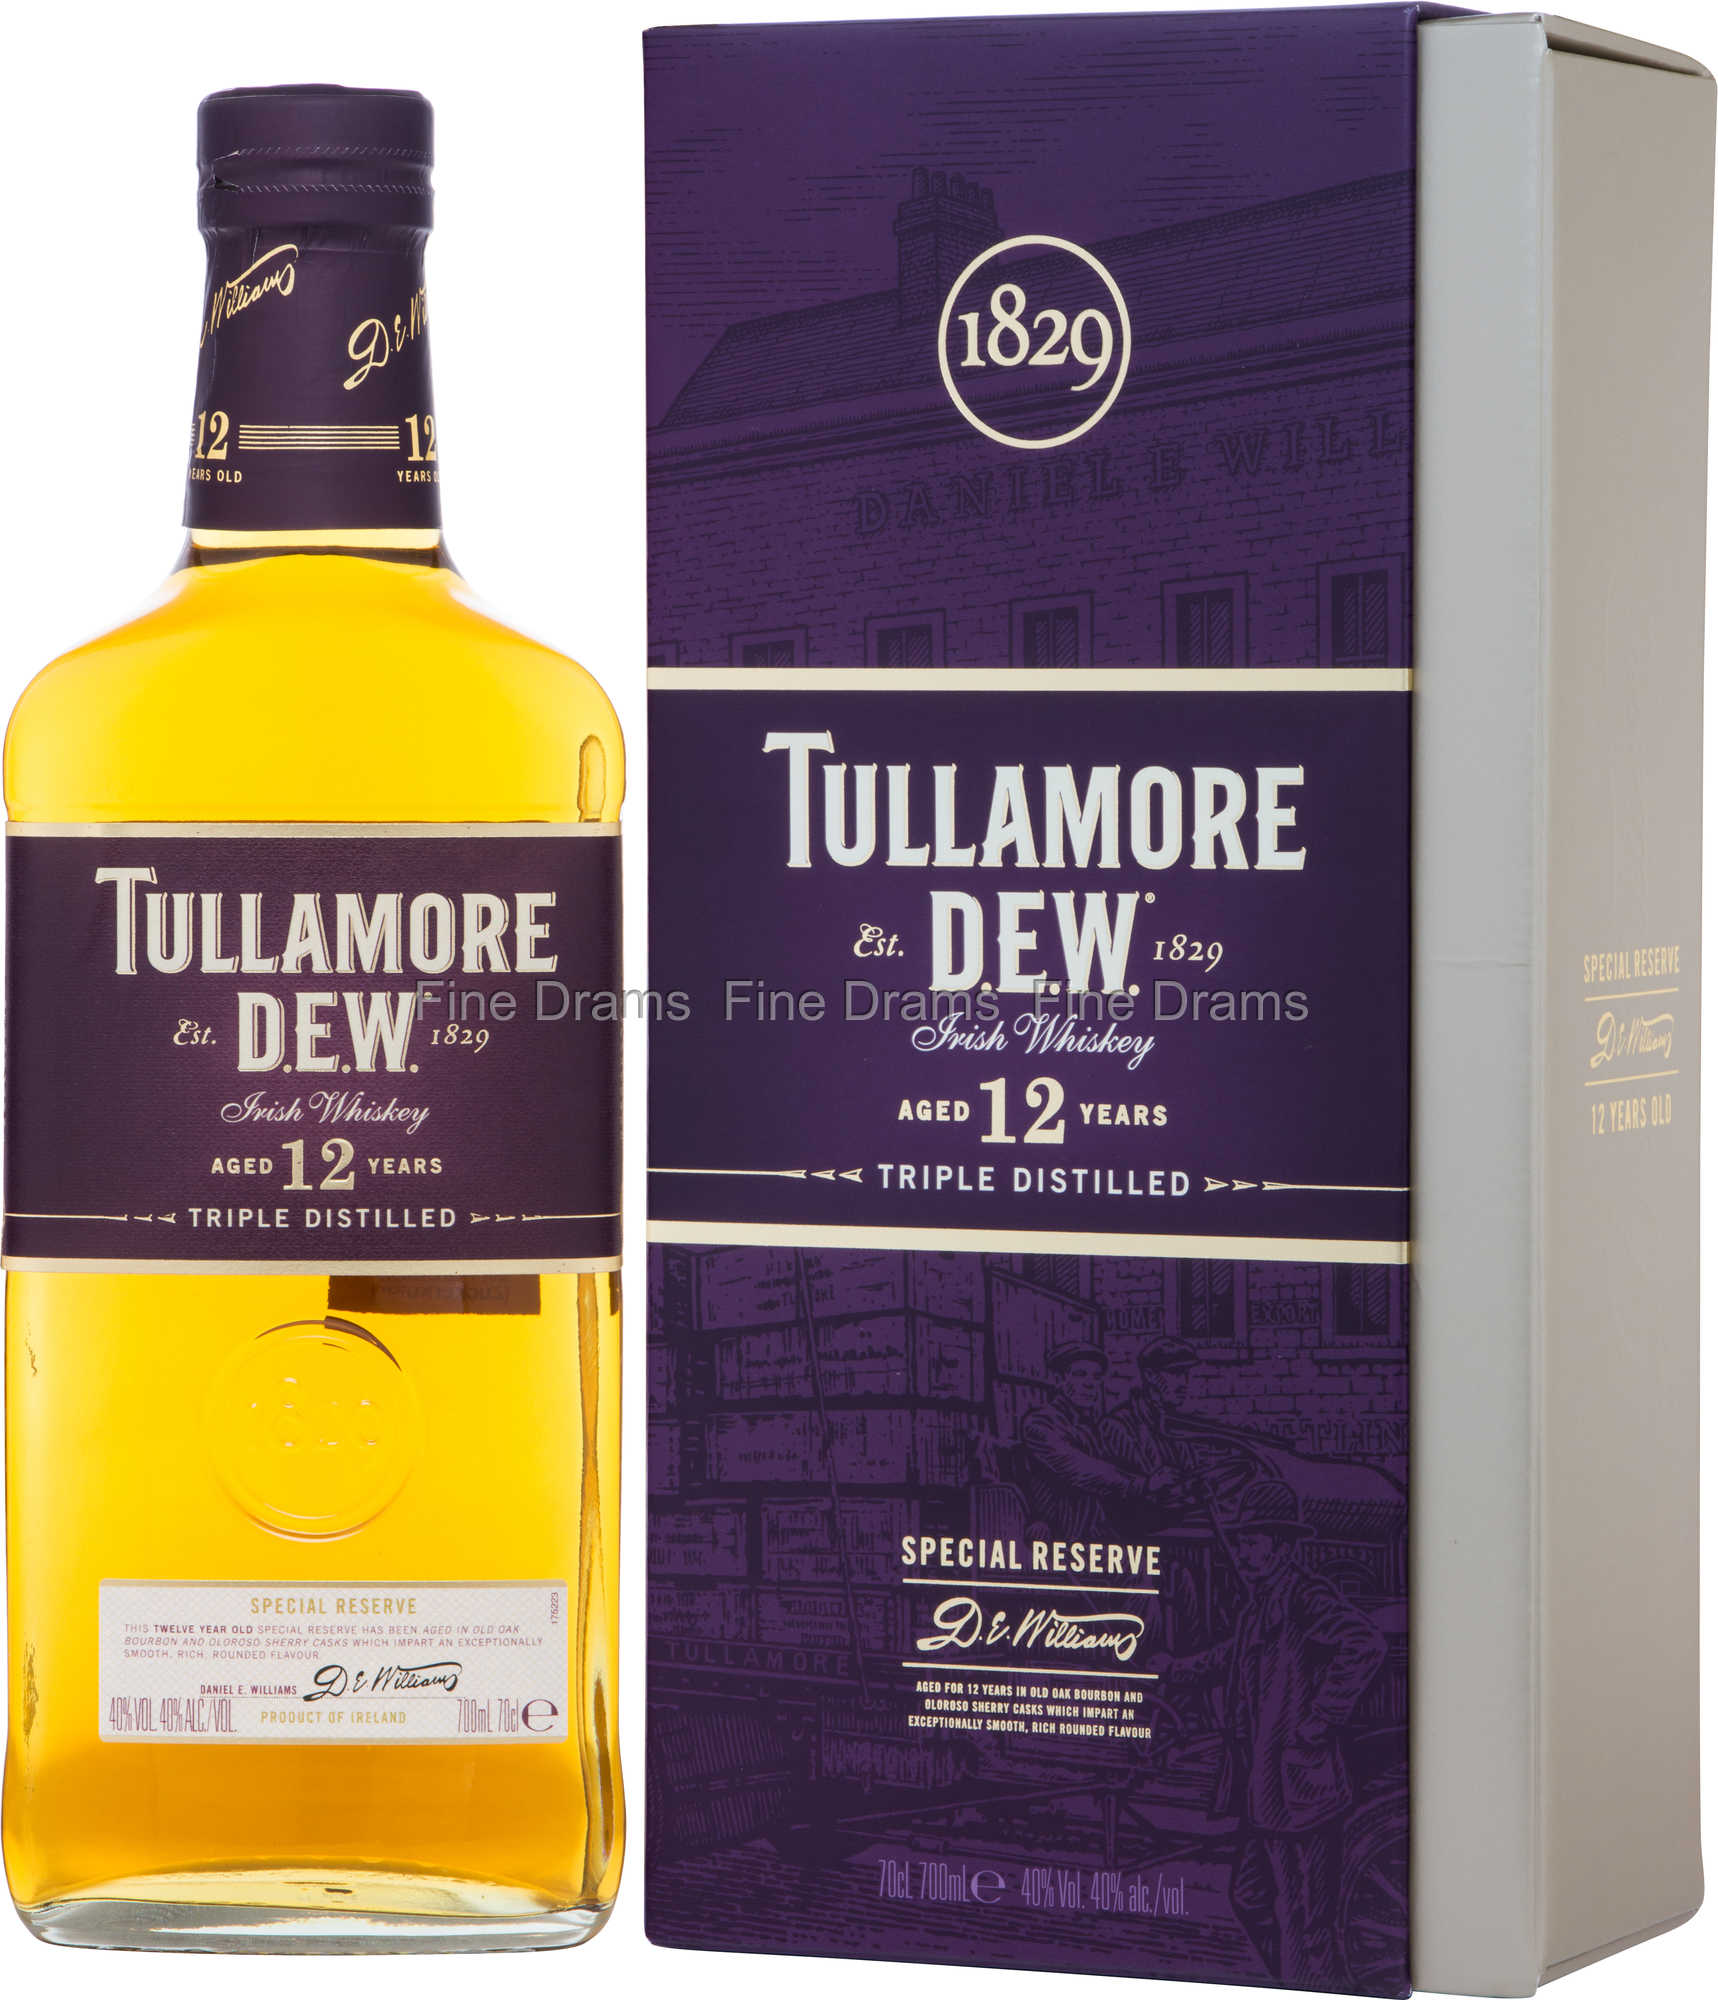 Old Year D.E.W. Tullamore 12 Whisky